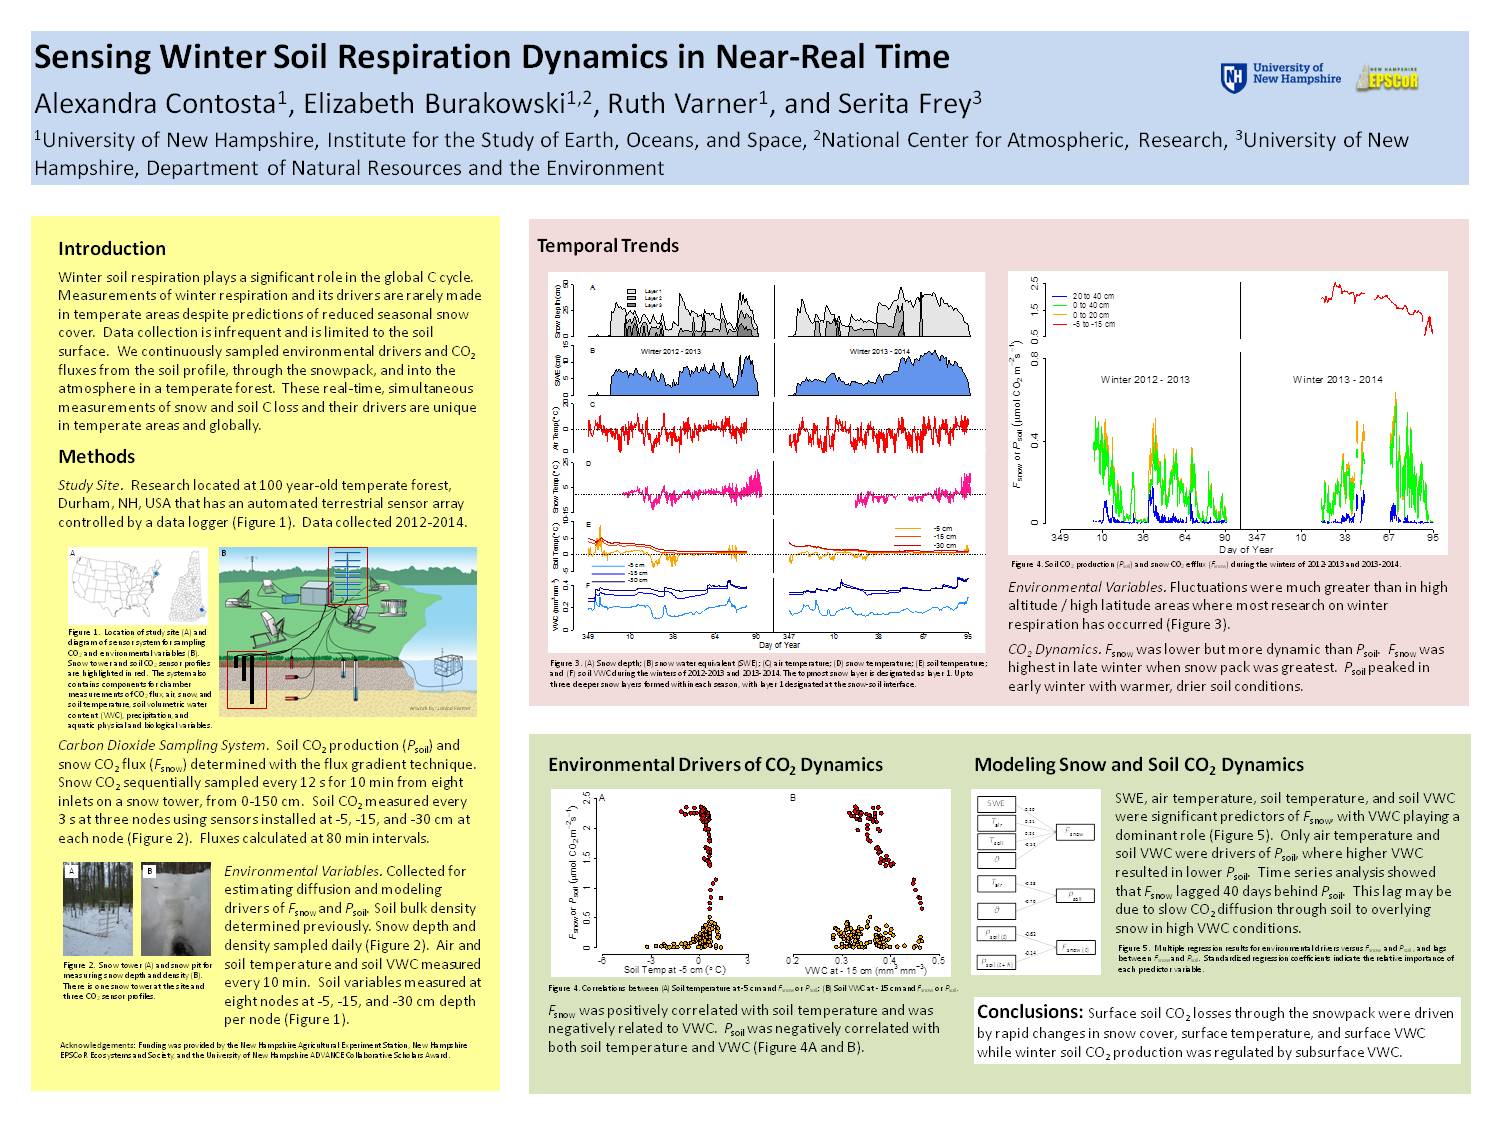 Sensing Winter Soil Respiration Dynamics In Near-Real Time by Alix